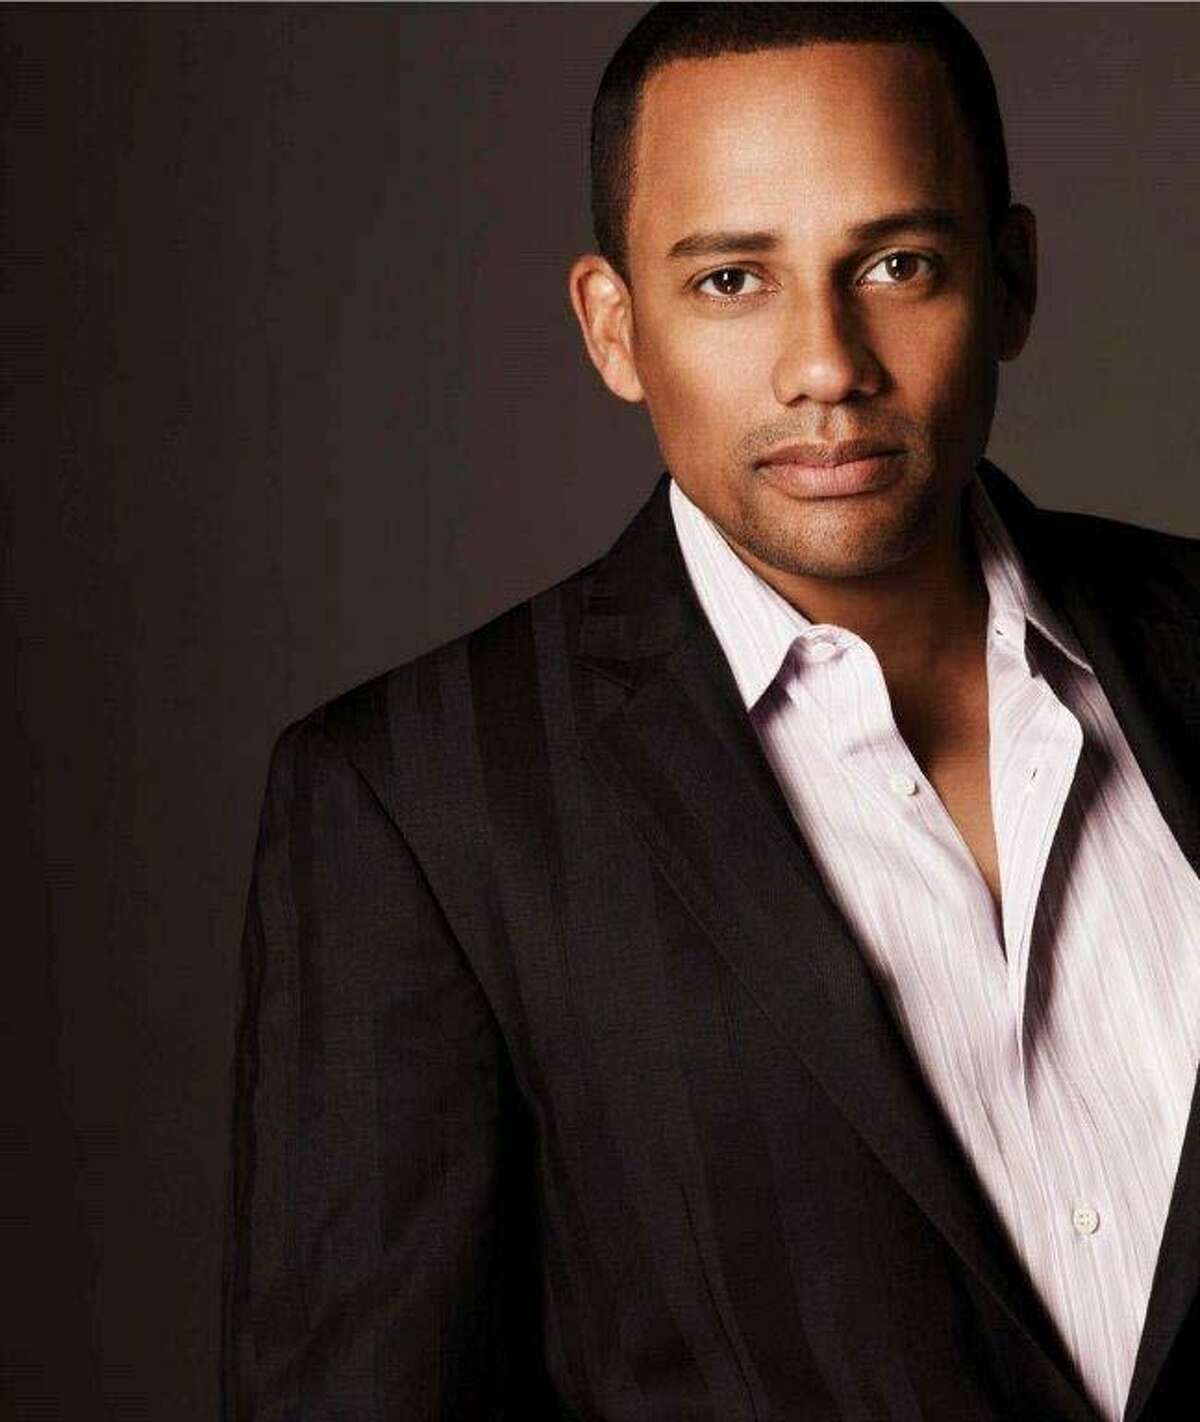 Actor Hill Harper will speak at the fifth annual Alzheimer's Association Connecticut Chapter Celebrating Hope dinner at l'escale at the Delamar Greenwich Harbor on Friday, May 5.